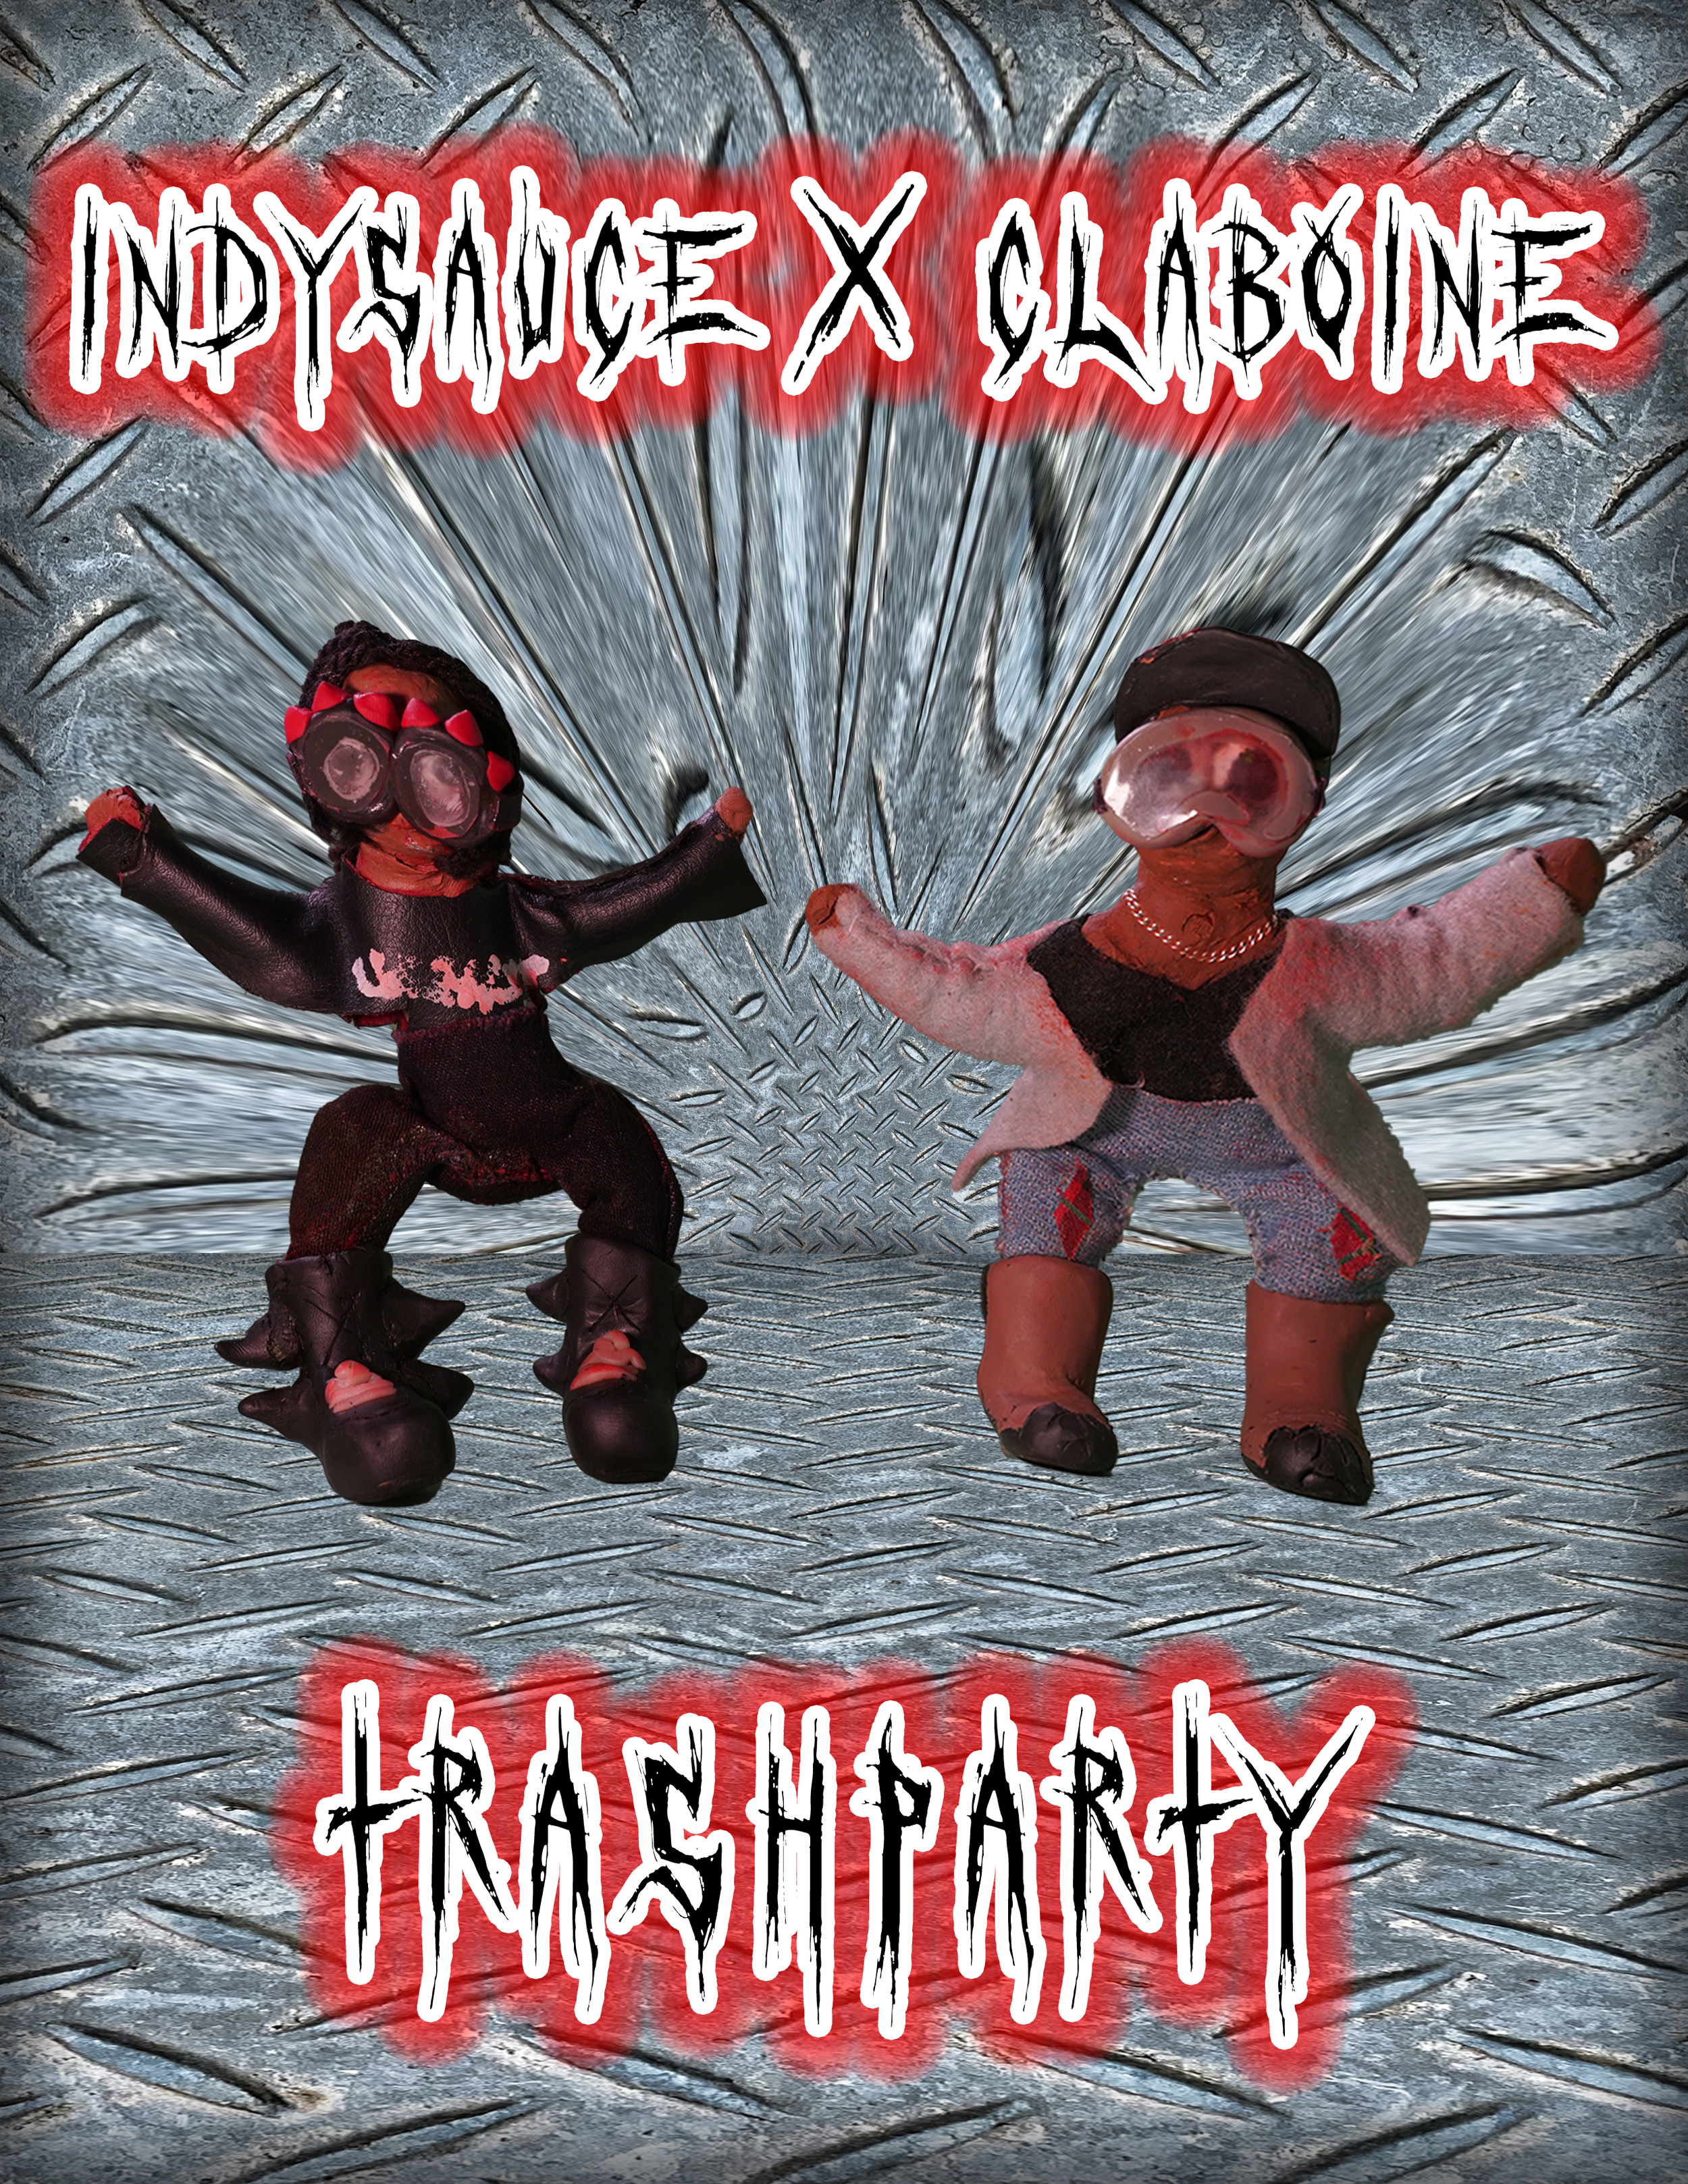 Indysauce x CLABOINE - TRA$HPARTY Claymation